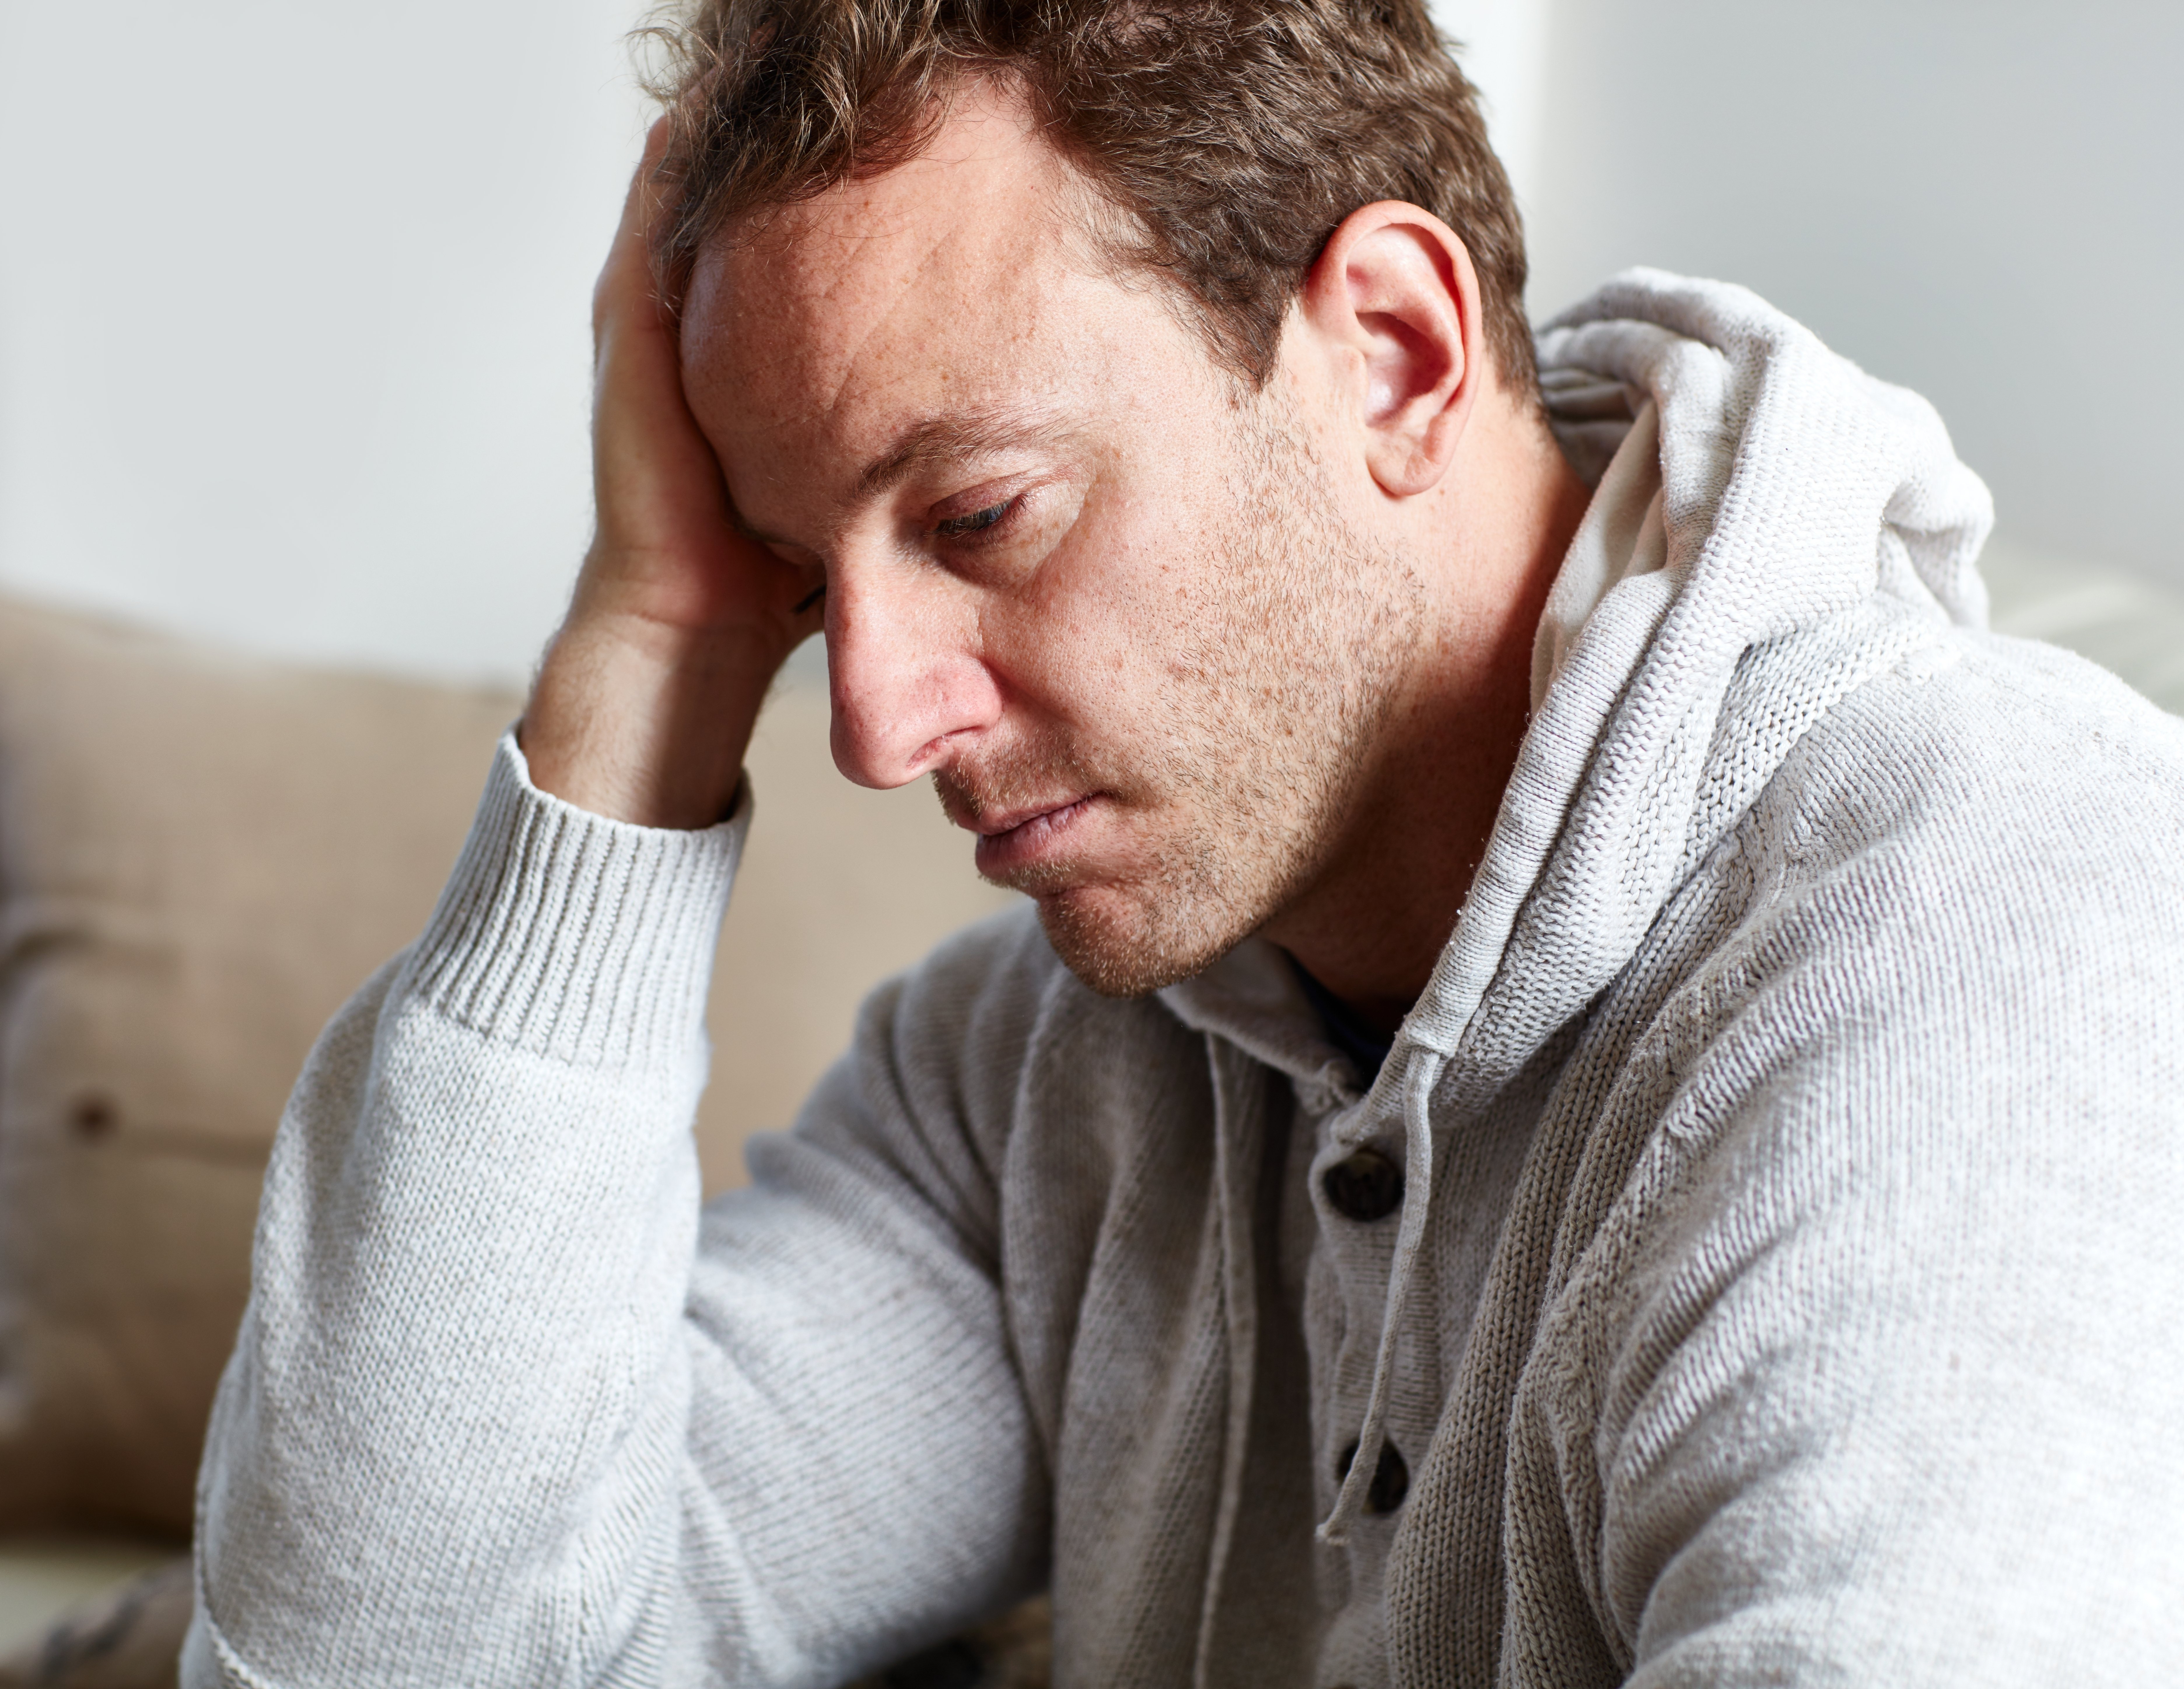 Distressed man with head in his hand. | Photo: Shutterstock